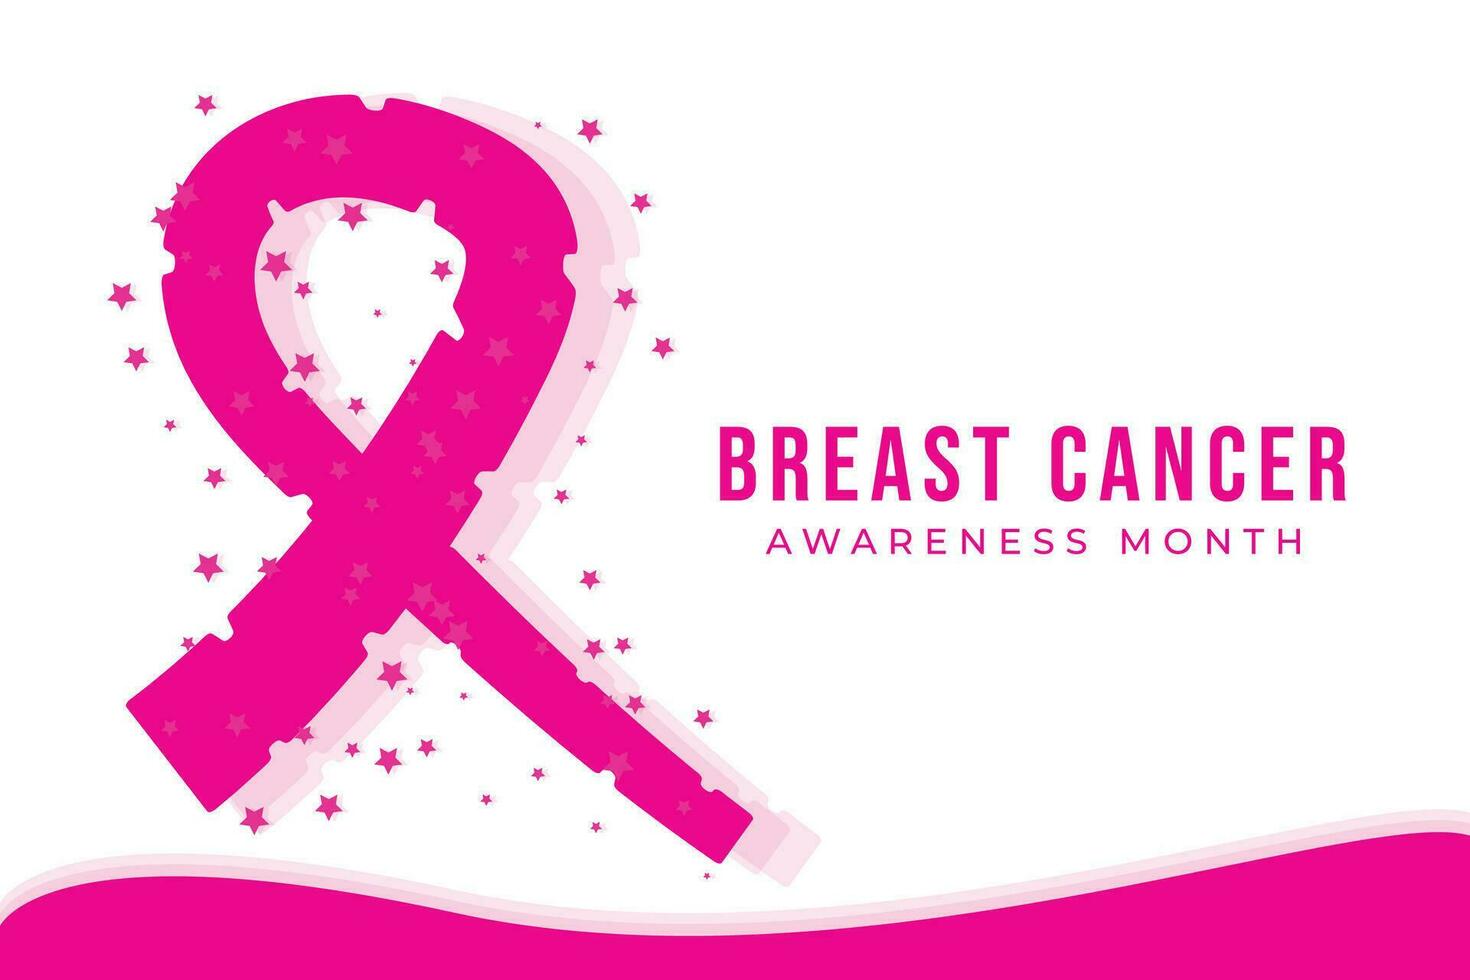 Breast cancer awareness month pink ribbon sign vector on white background